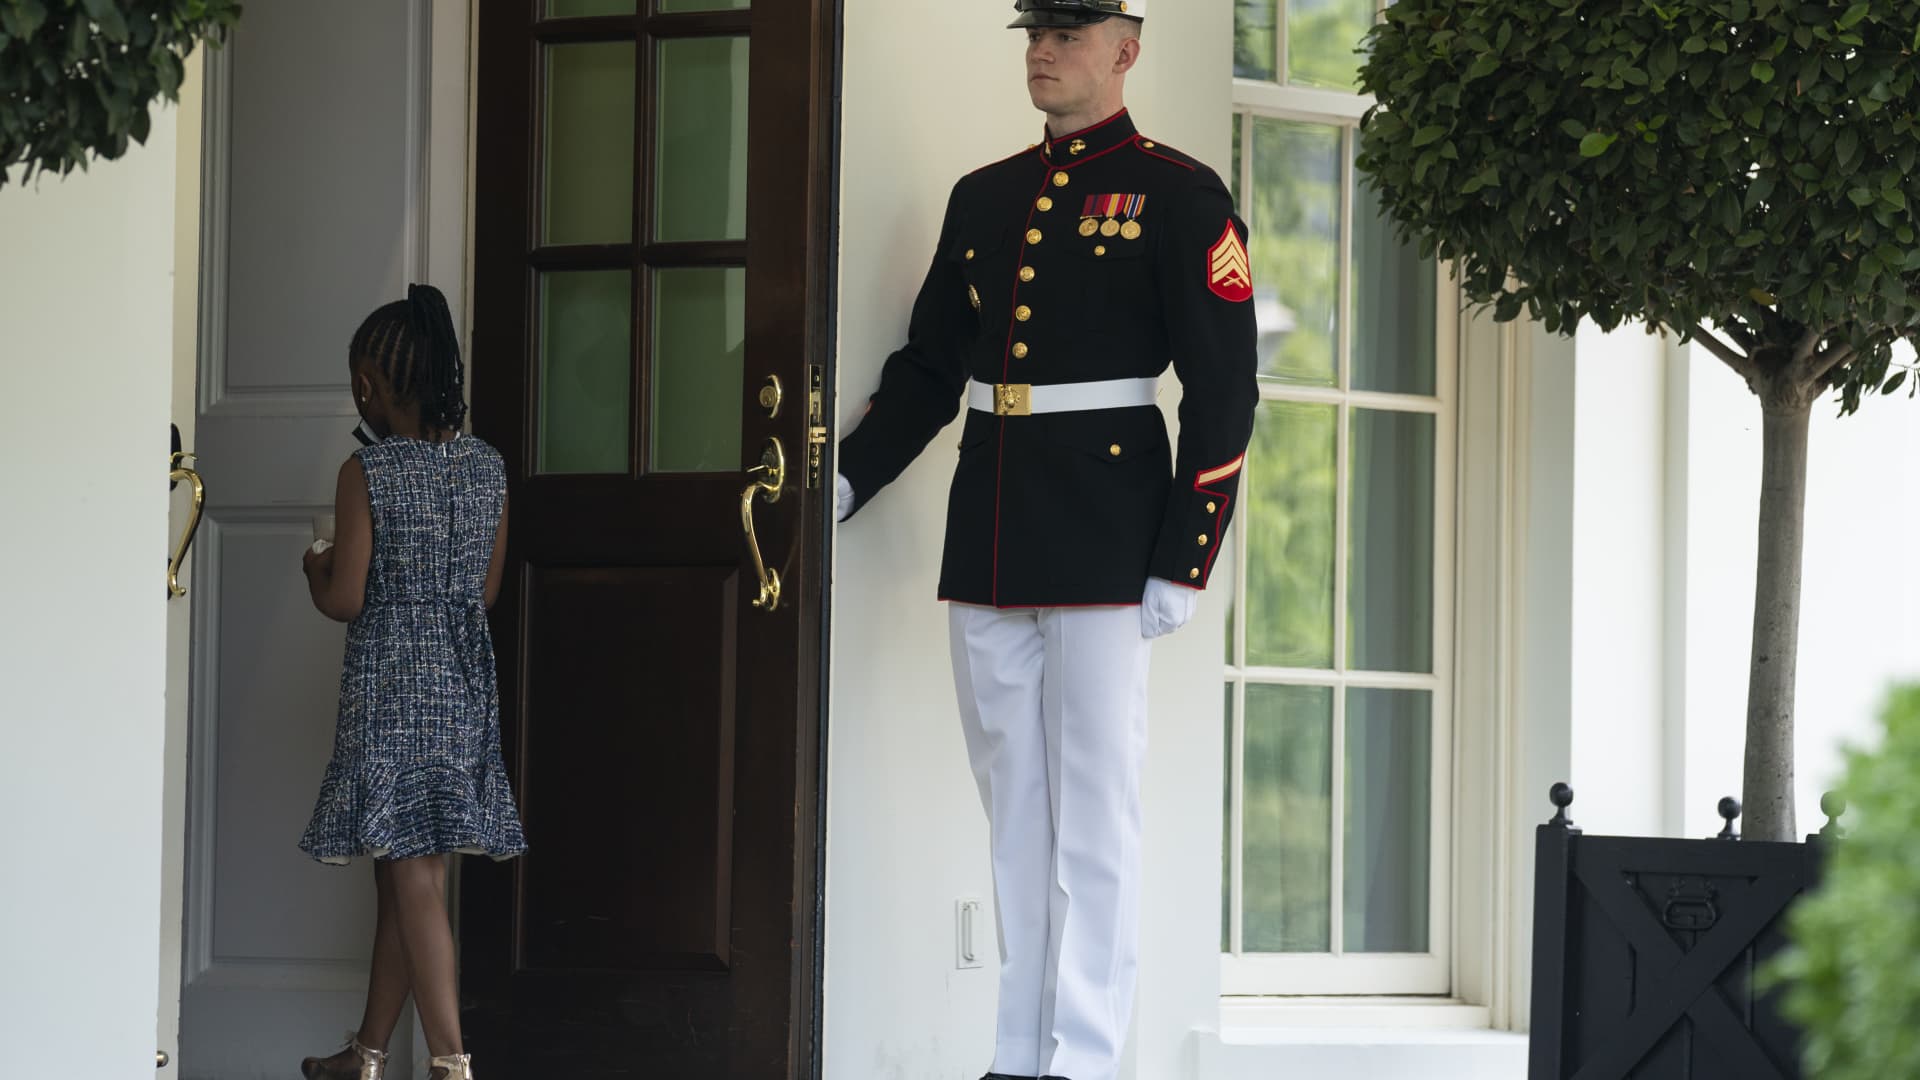 A Marine holds the door as Gianna Floyd, the daughter of George Floyd, walks into the White House, Tuesday, May 25, 2021, in Washington.